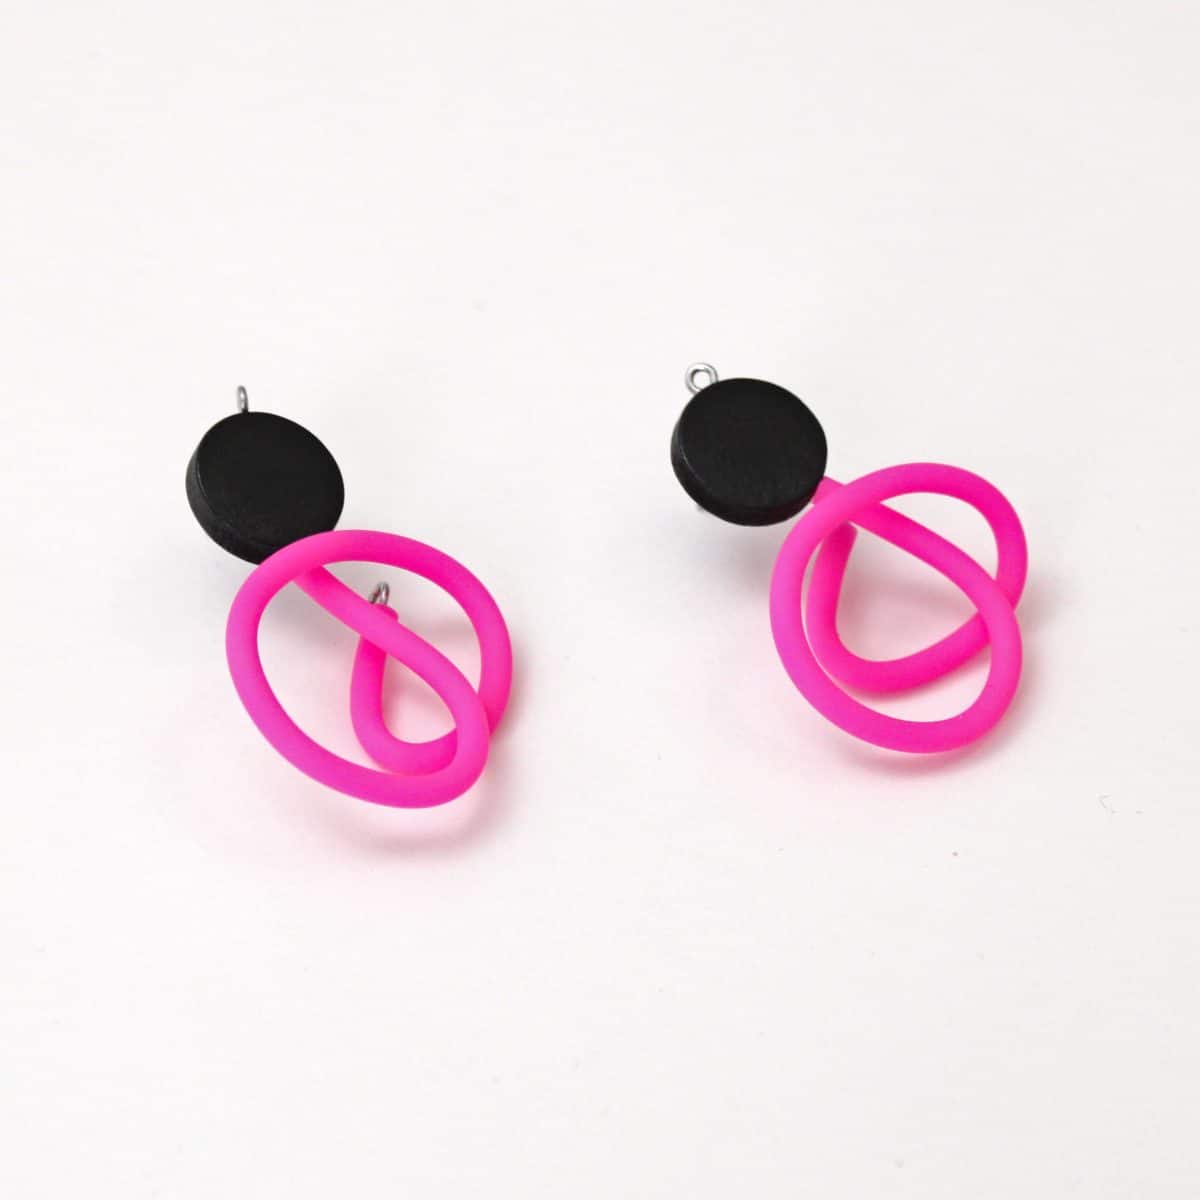 Artistic Black and Pink Rubber Tubing Post Dora Earrings